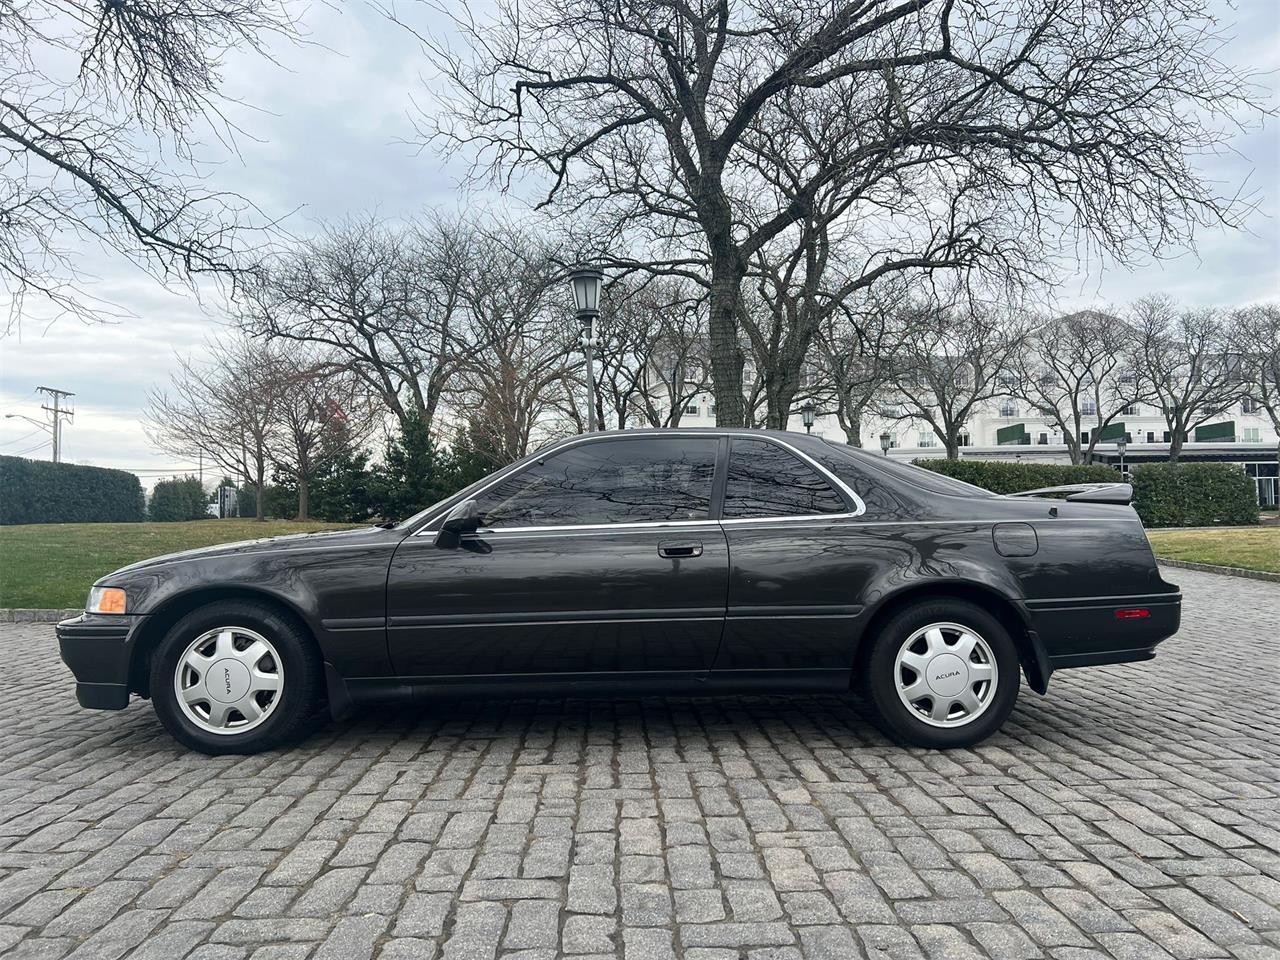 1989 Acura Legend in Highland Park, New Jersey